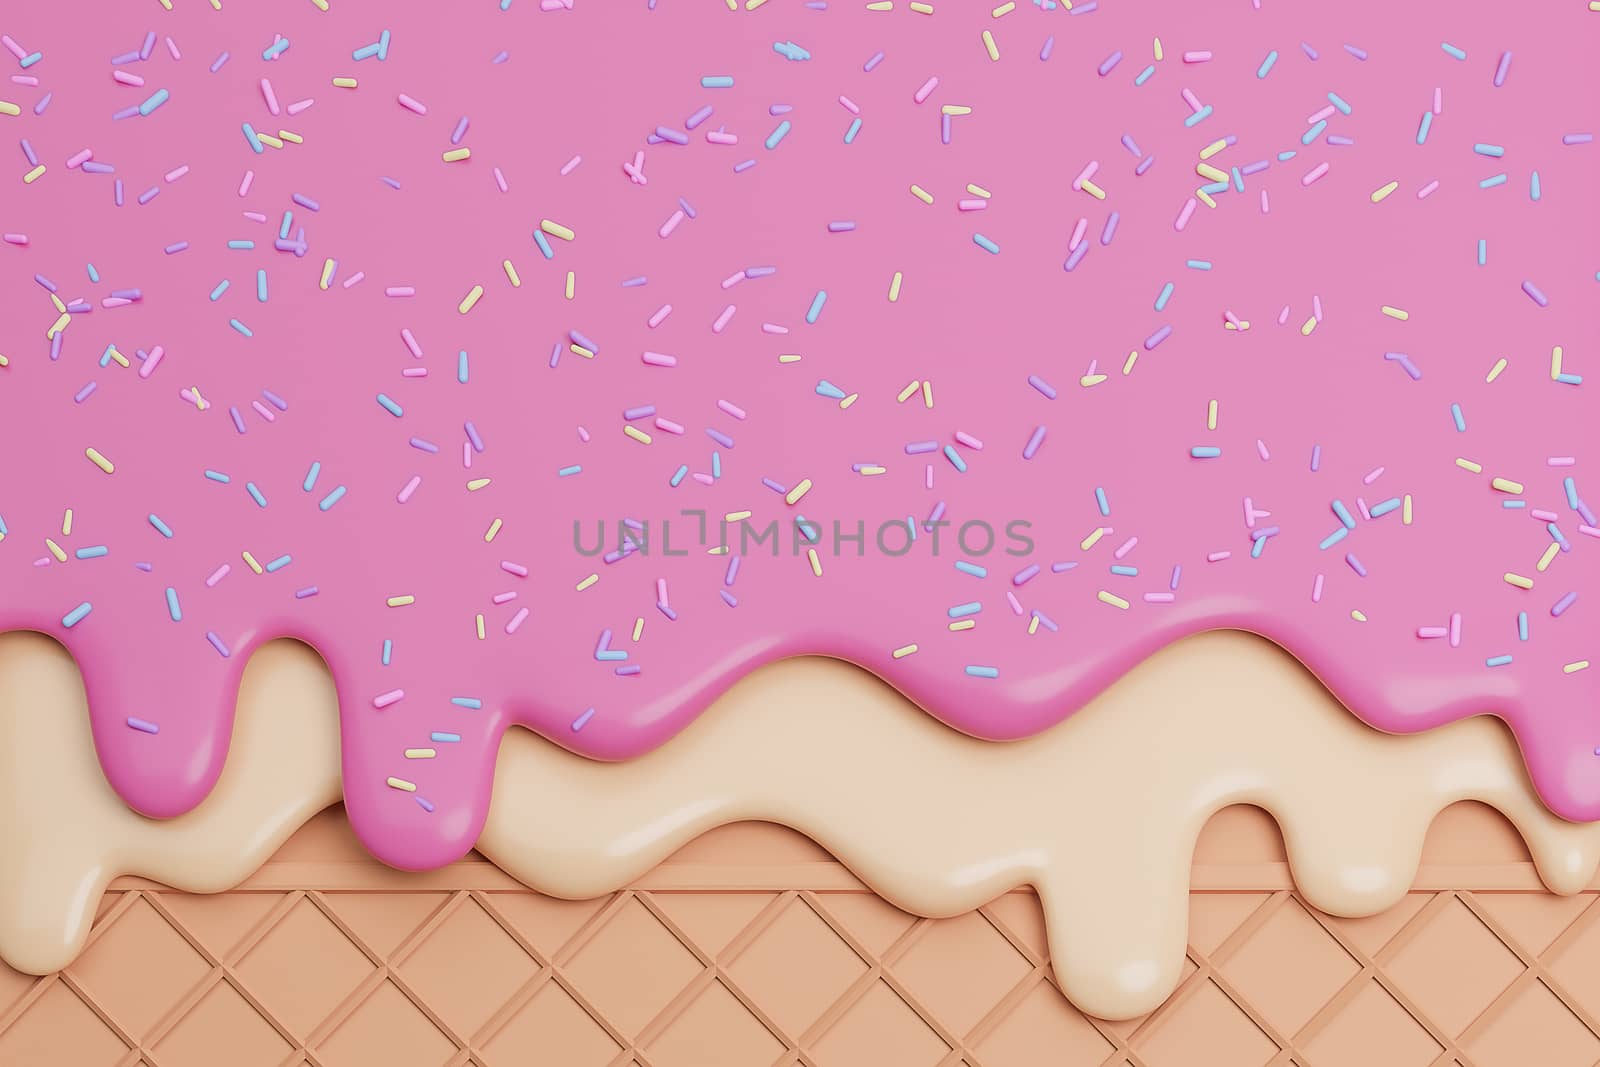 Strawbery and Vanilla Ice Cream Melted with Sprinkles on Wafer Background.,3d model and illustration.